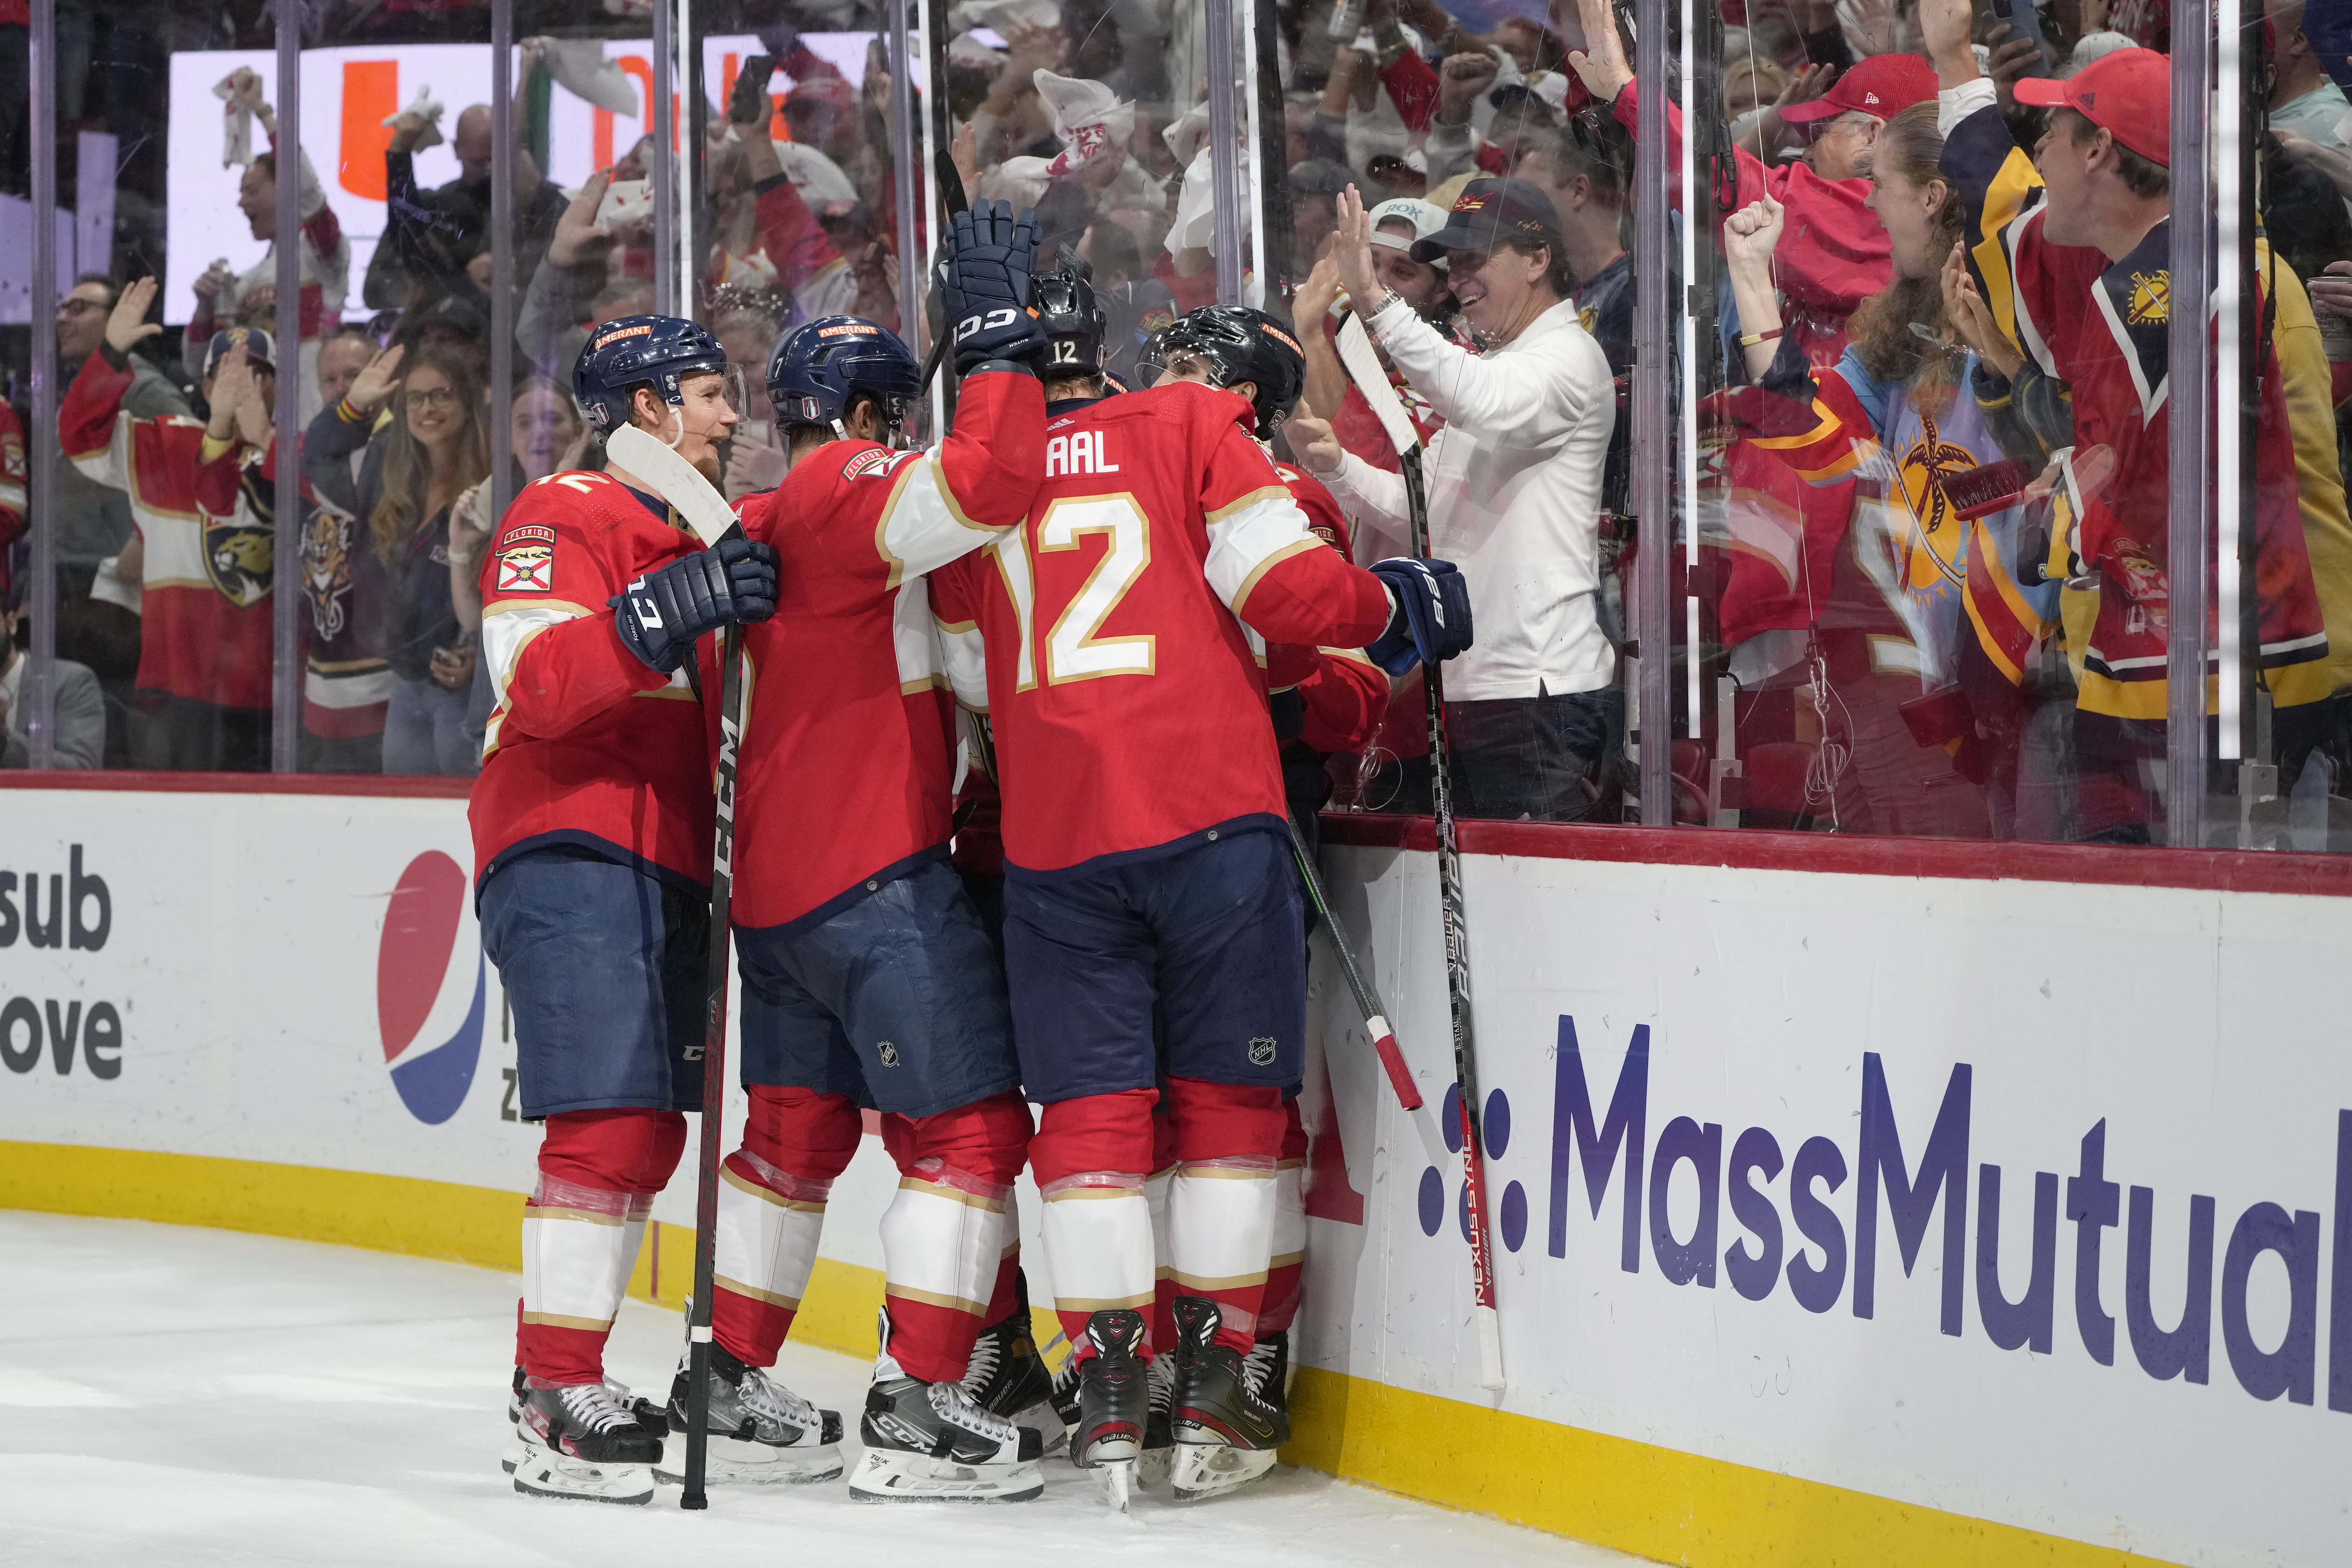 Tkachuk scores another OT winner, lifting Panthers to 2-0 series lead vs  Hurricanes - NBC Sports